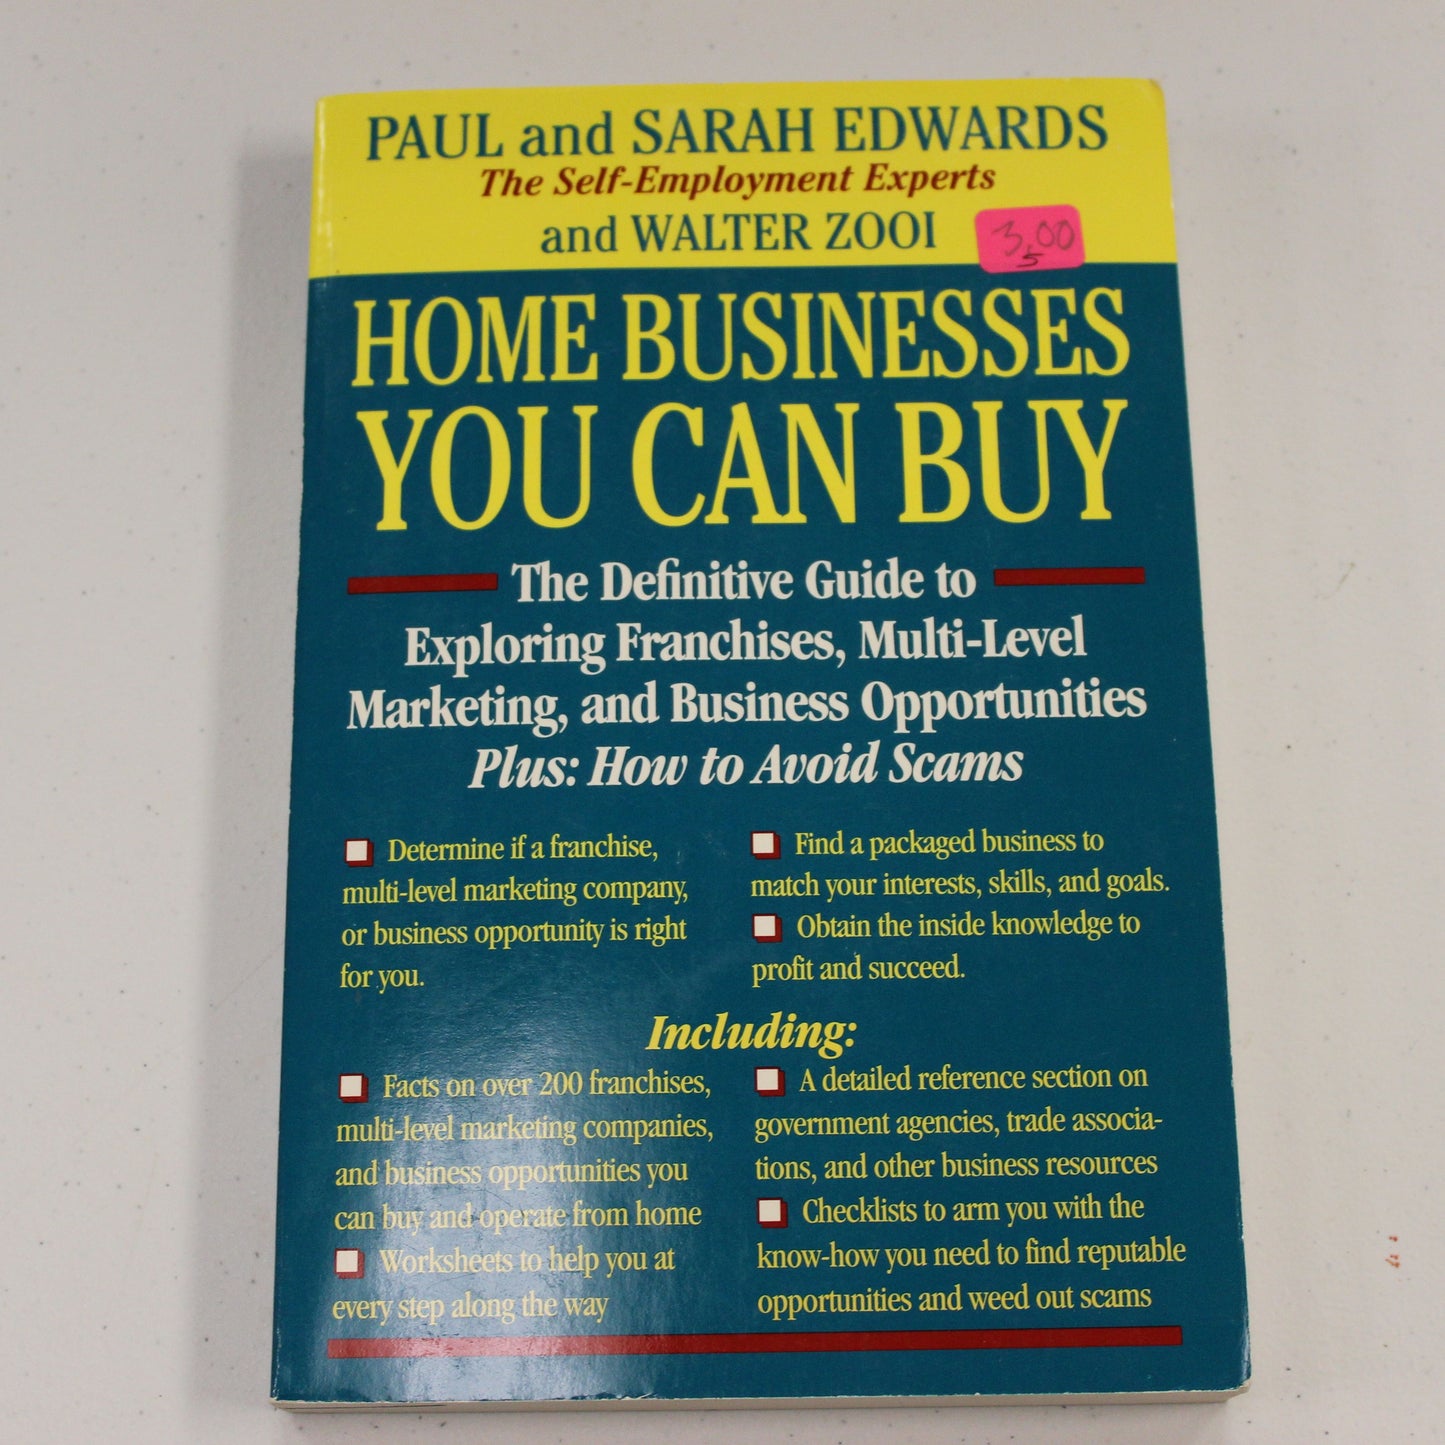 HOME BUSINESS YOU CAN BUY